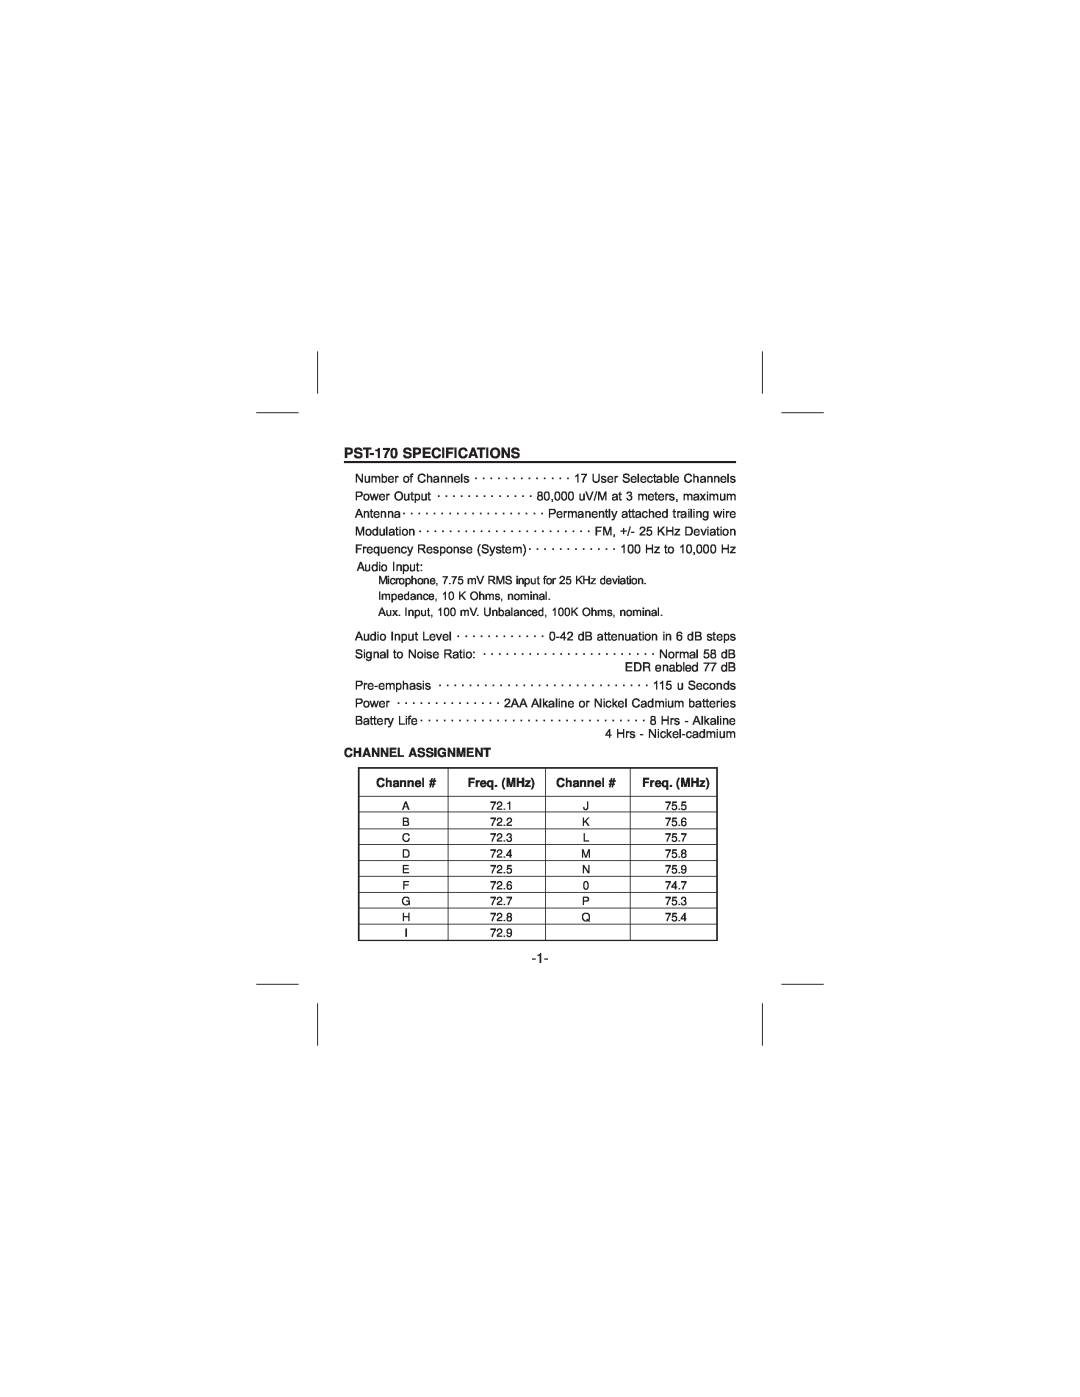 Telex manual PST-170SPECIFICATIONS, Channel Assignment, Channel #, Freq. MHz 